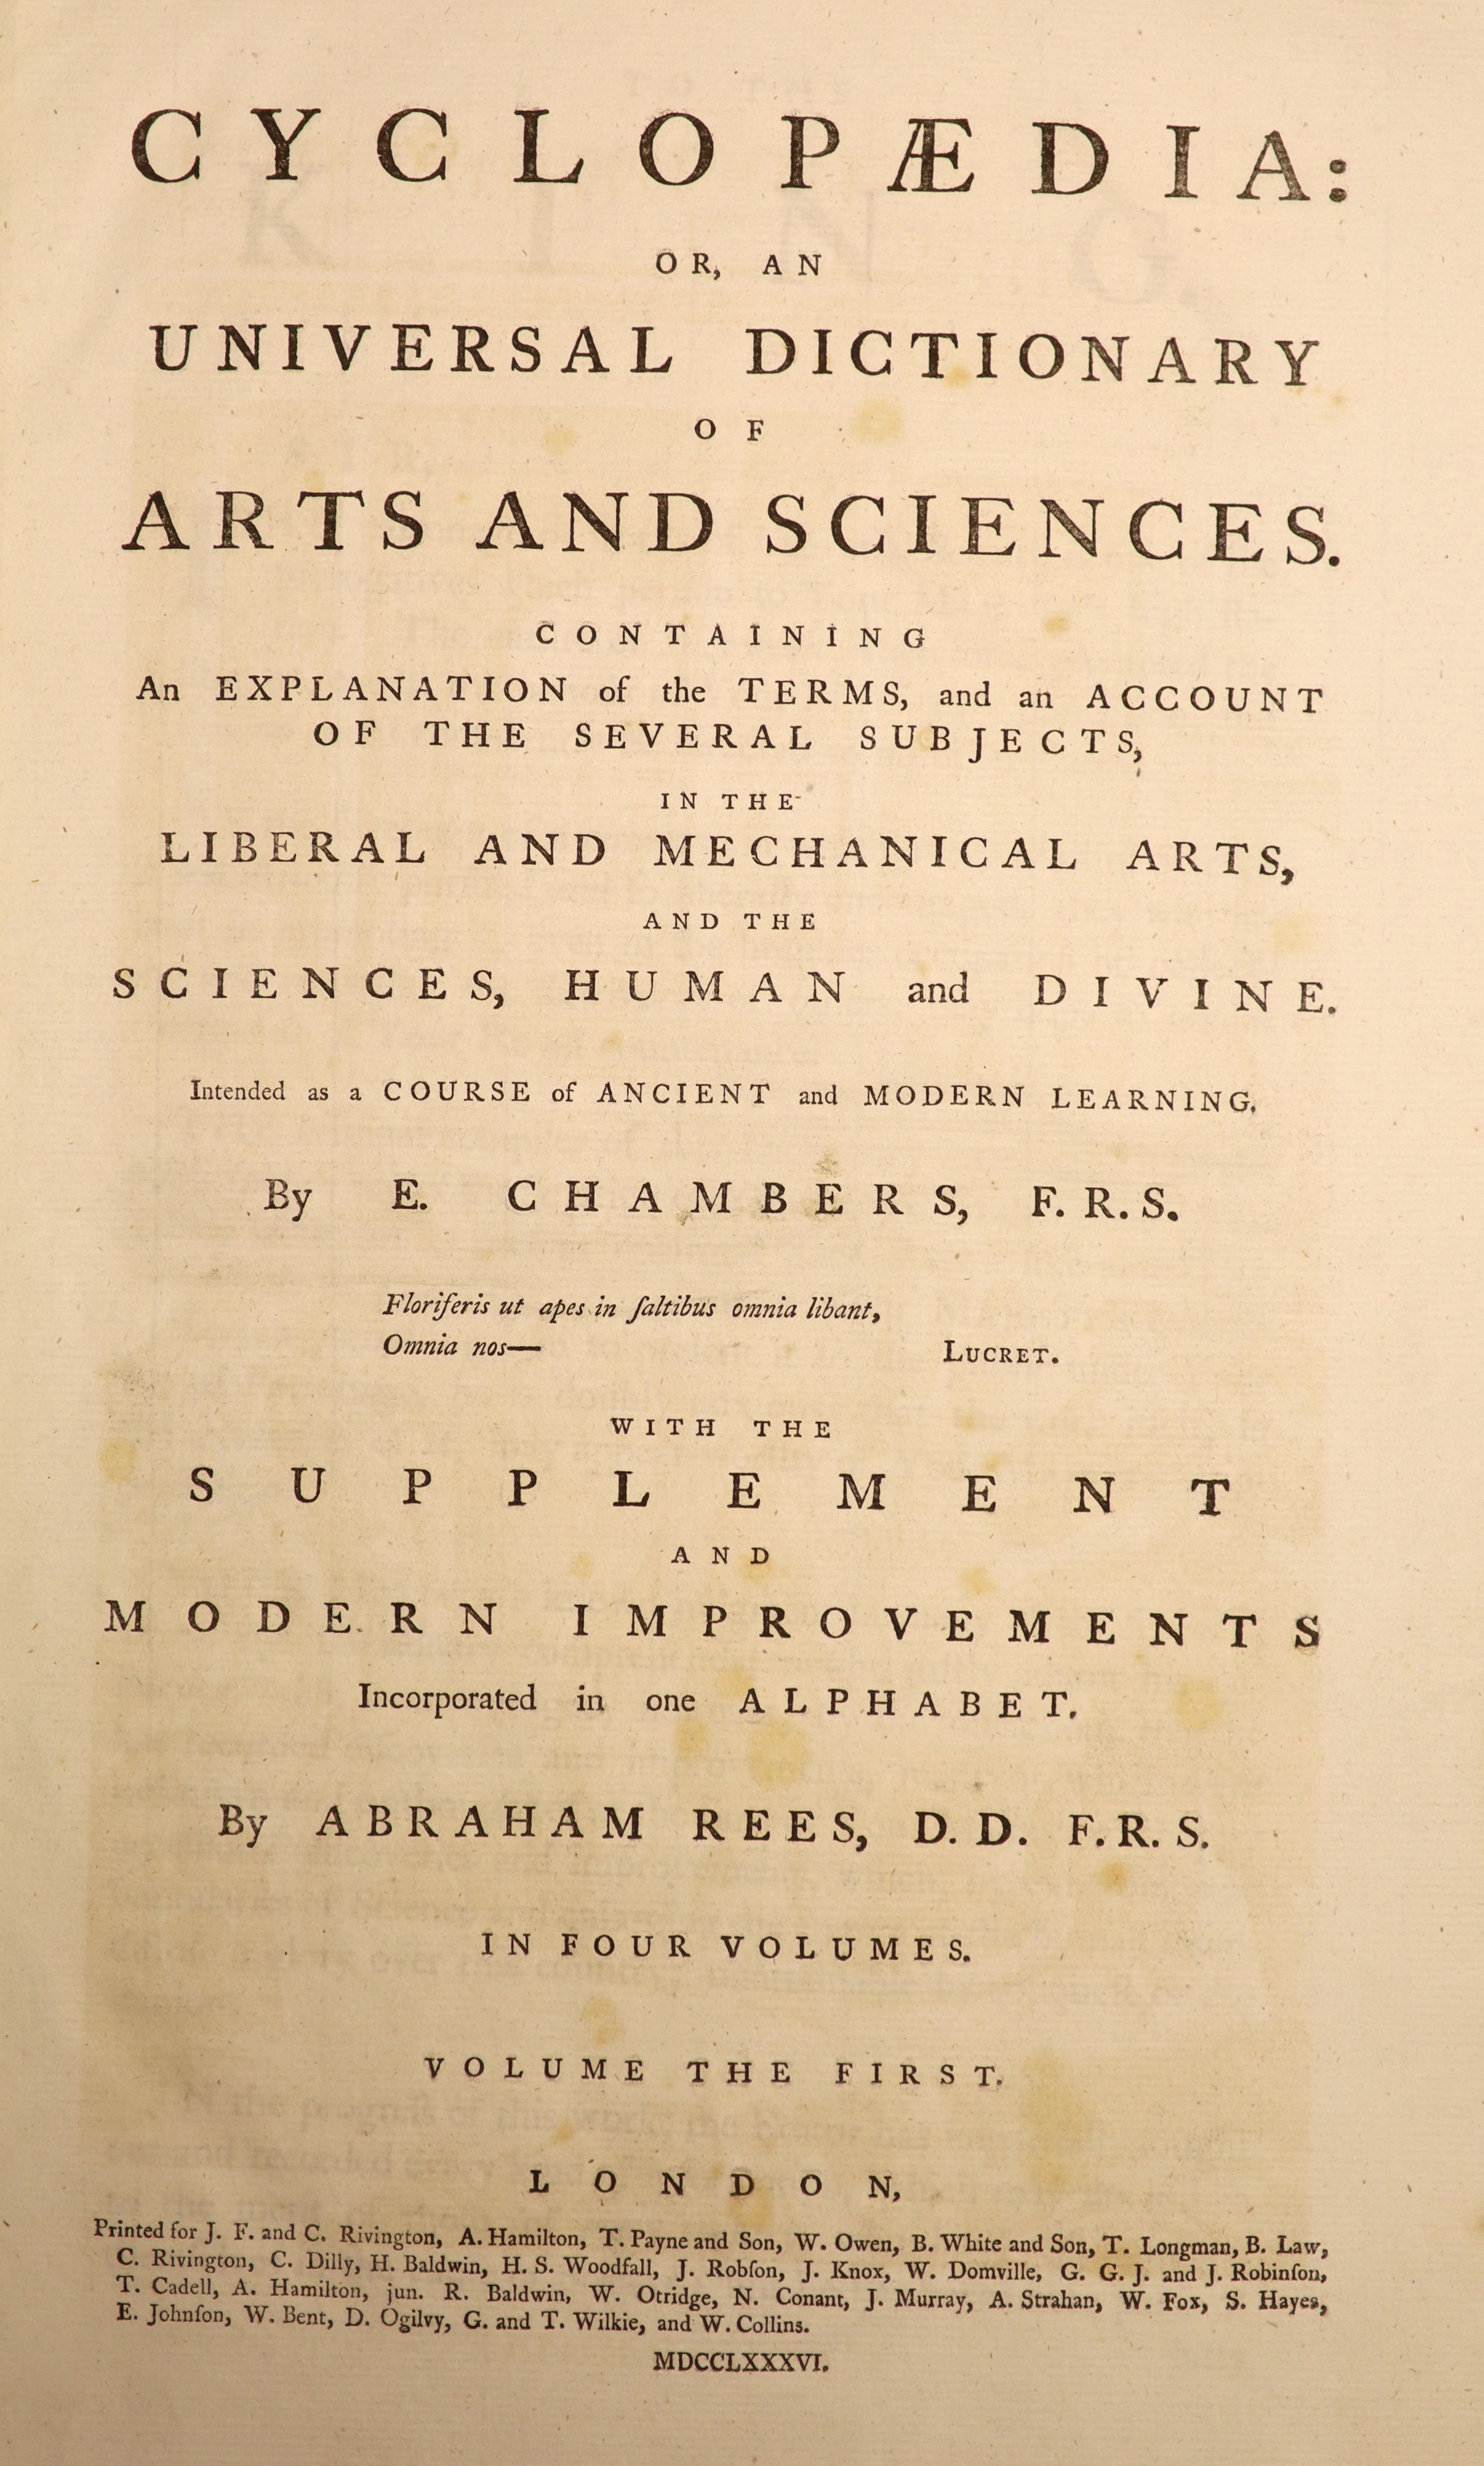 Chambers, Ephrain. Cyclopaedia: or, An Universal Dictionary of Arts and Sciences ..., 5 vols, (including Supplement and Plates volume), with hundreds of illus. on the very many engraved plates: contemp. gilt decorated tr